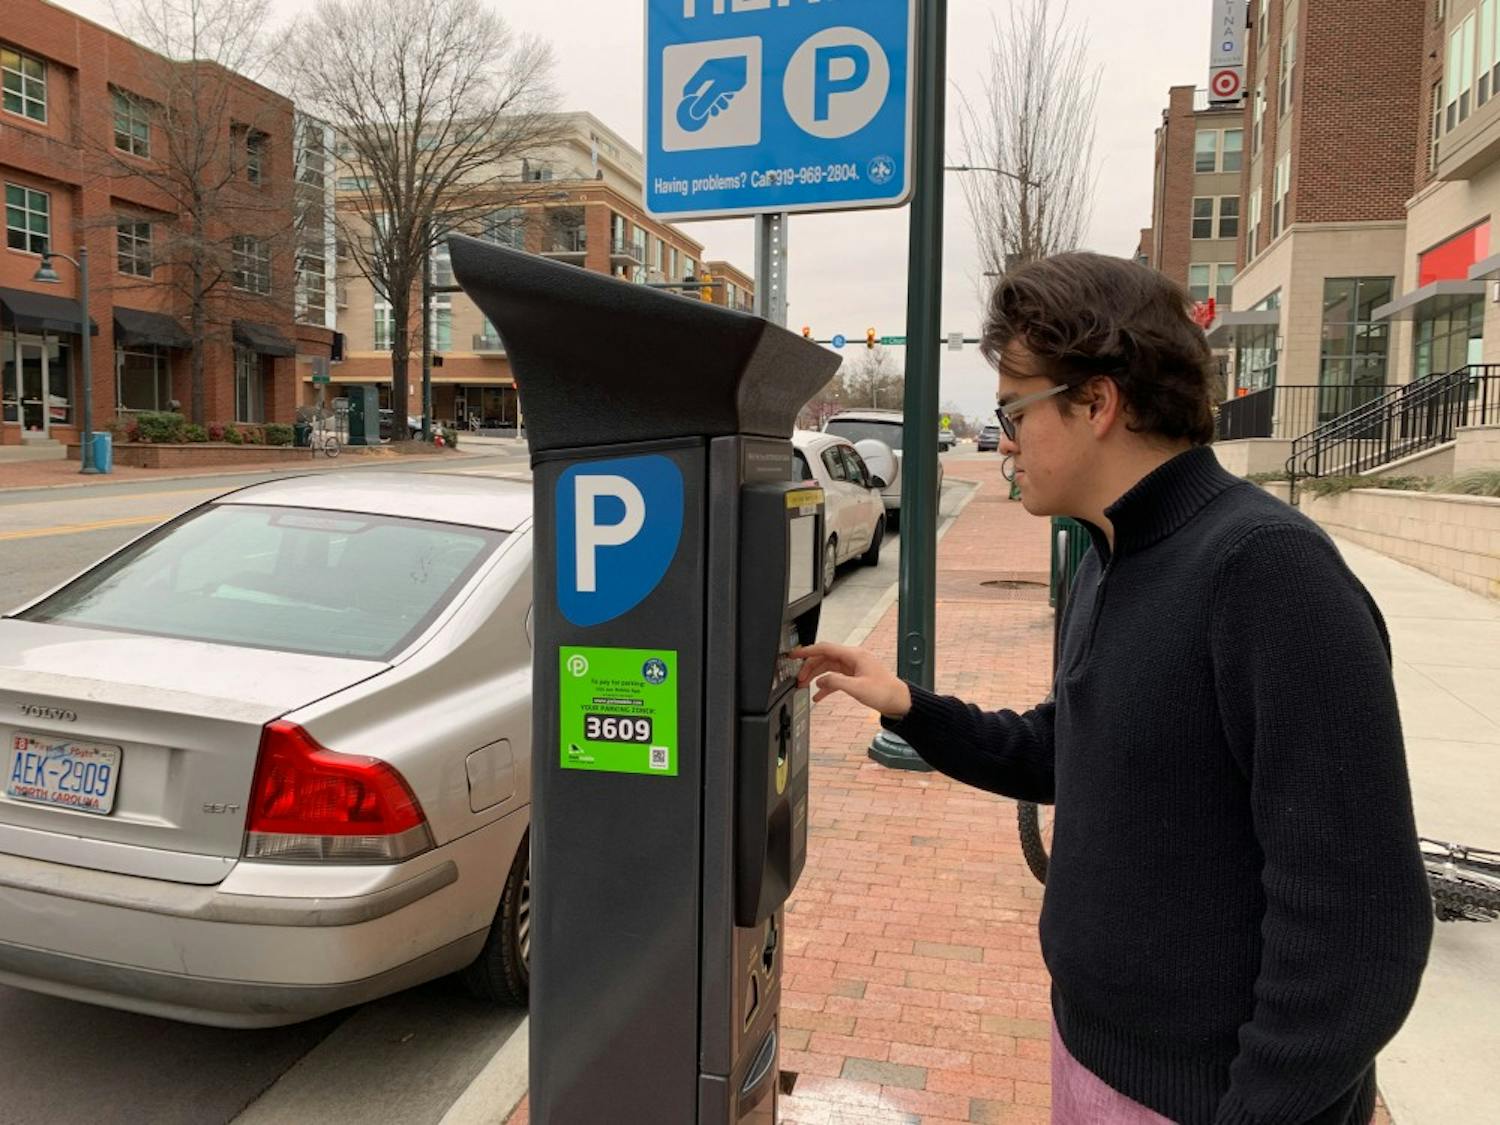 Community member Stefan Hartelt interacts with the parking meter outside of Target on Franklin Street.